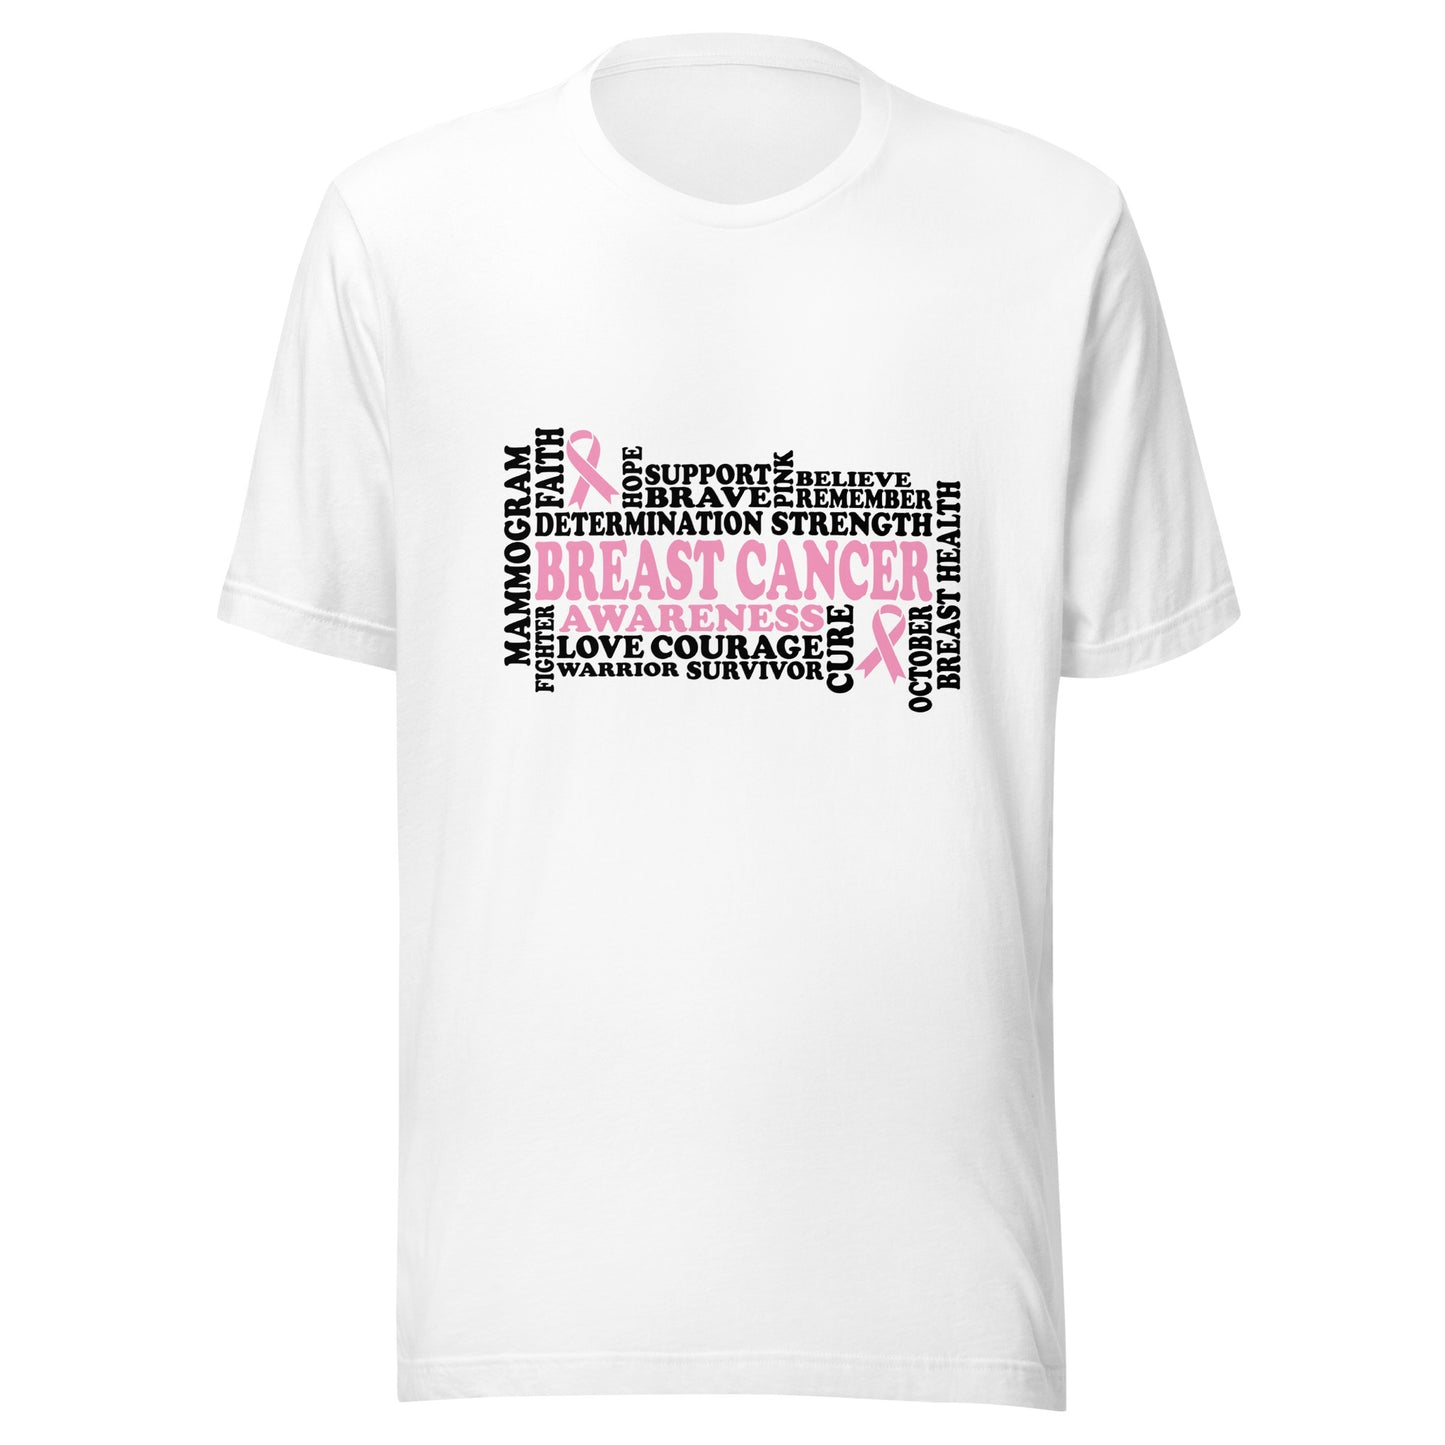 Breast Cancer Awareness Word Art and Sayings - Survivor - Pink Ribbon Unisex T-shirt